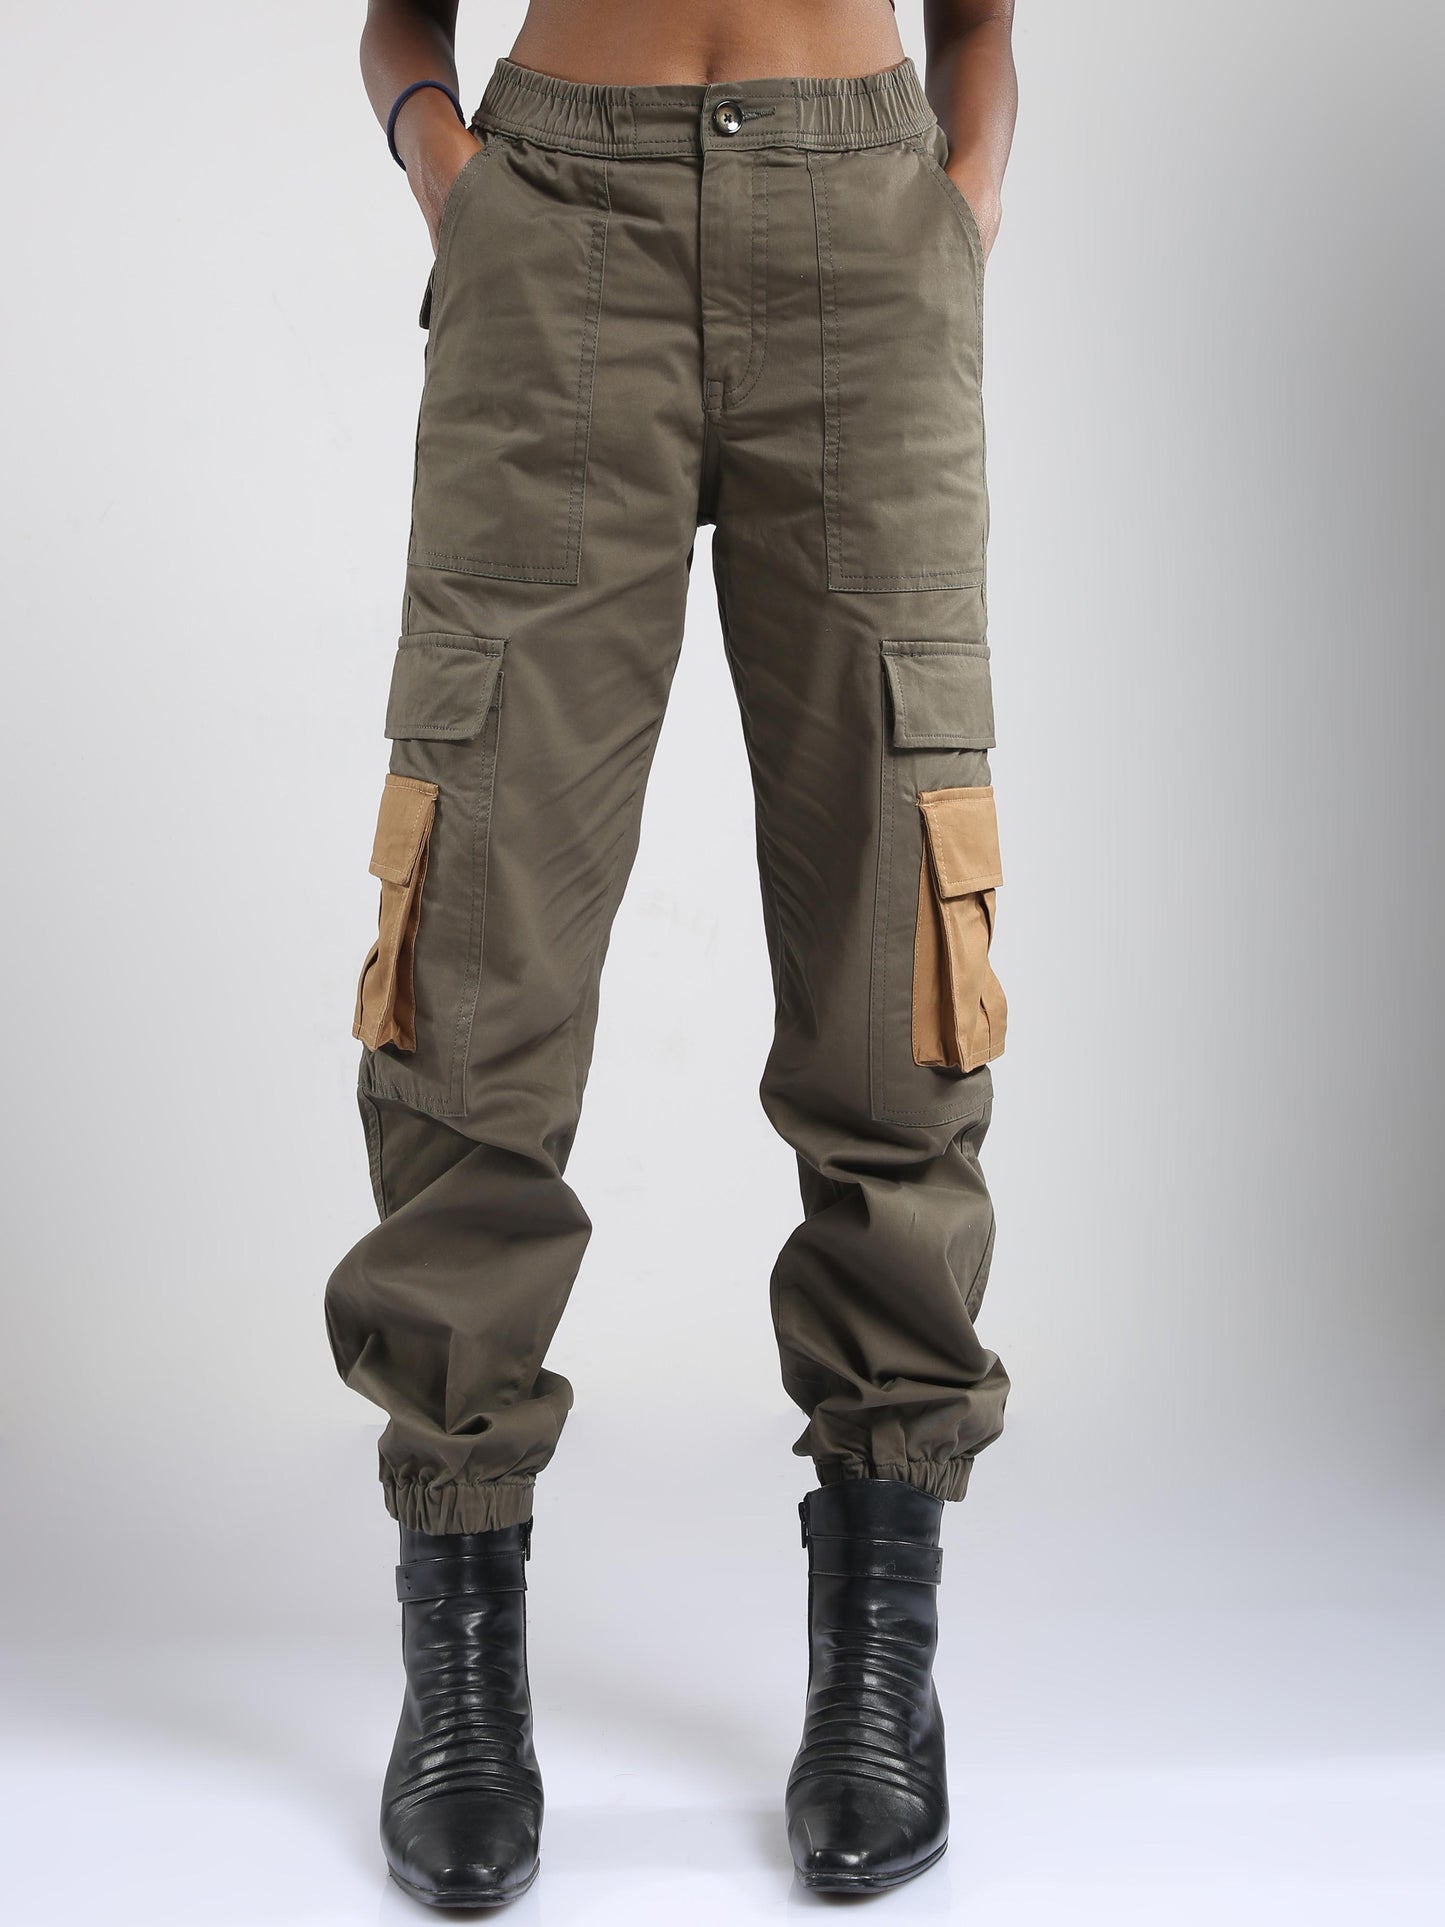 Olive Green Joggers Womens